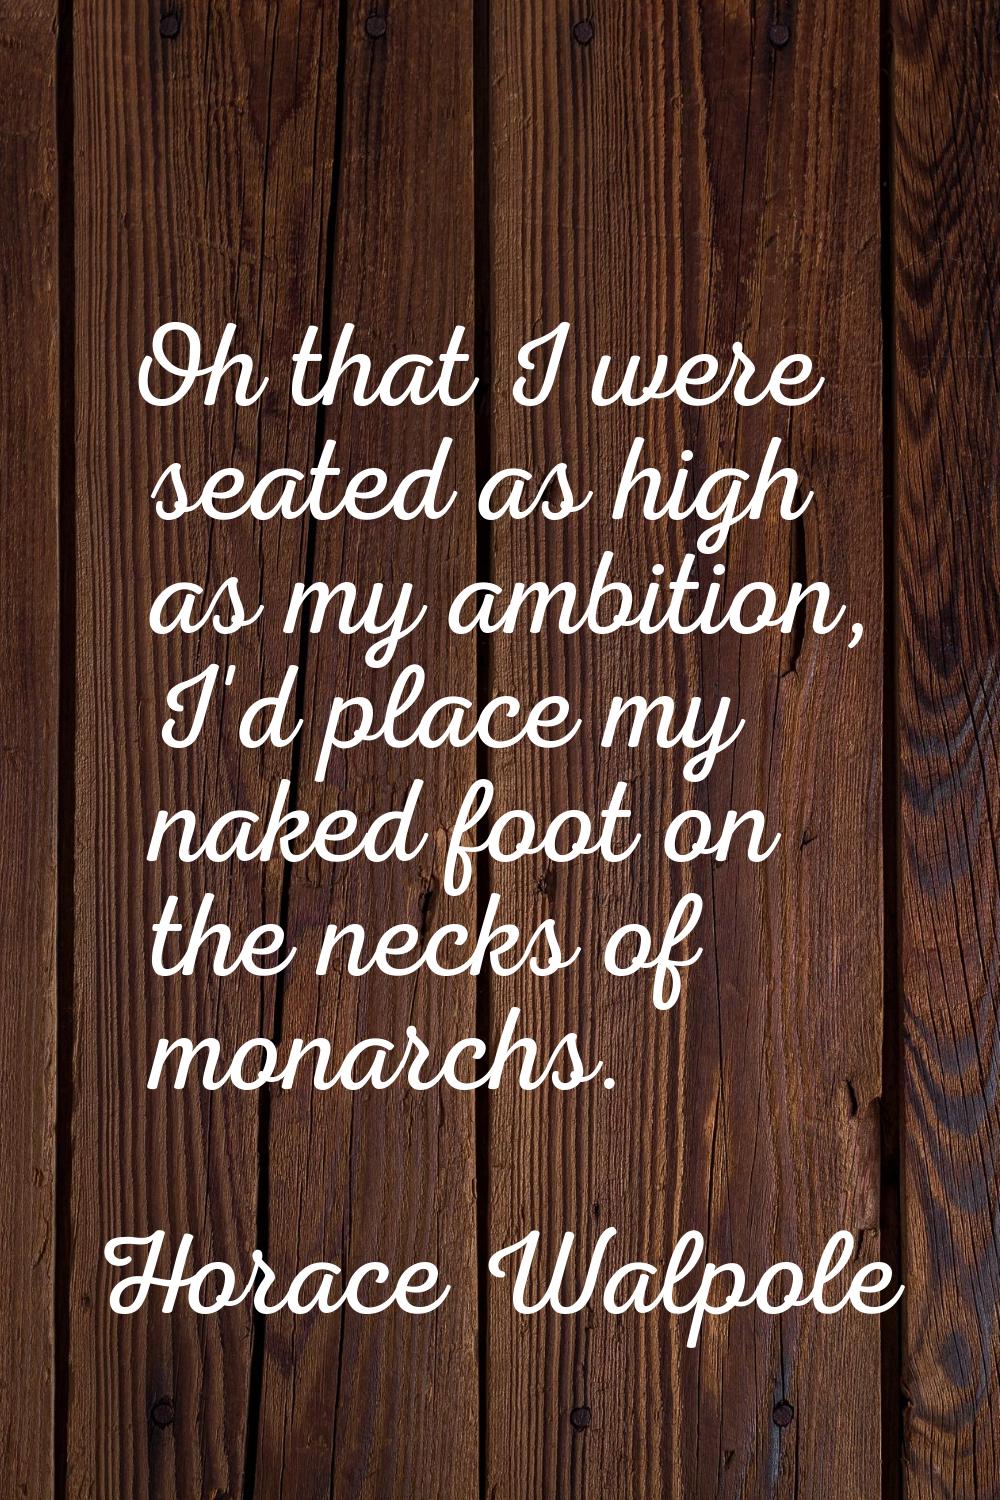 Oh that I were seated as high as my ambition, I'd place my naked foot on the necks of monarchs.